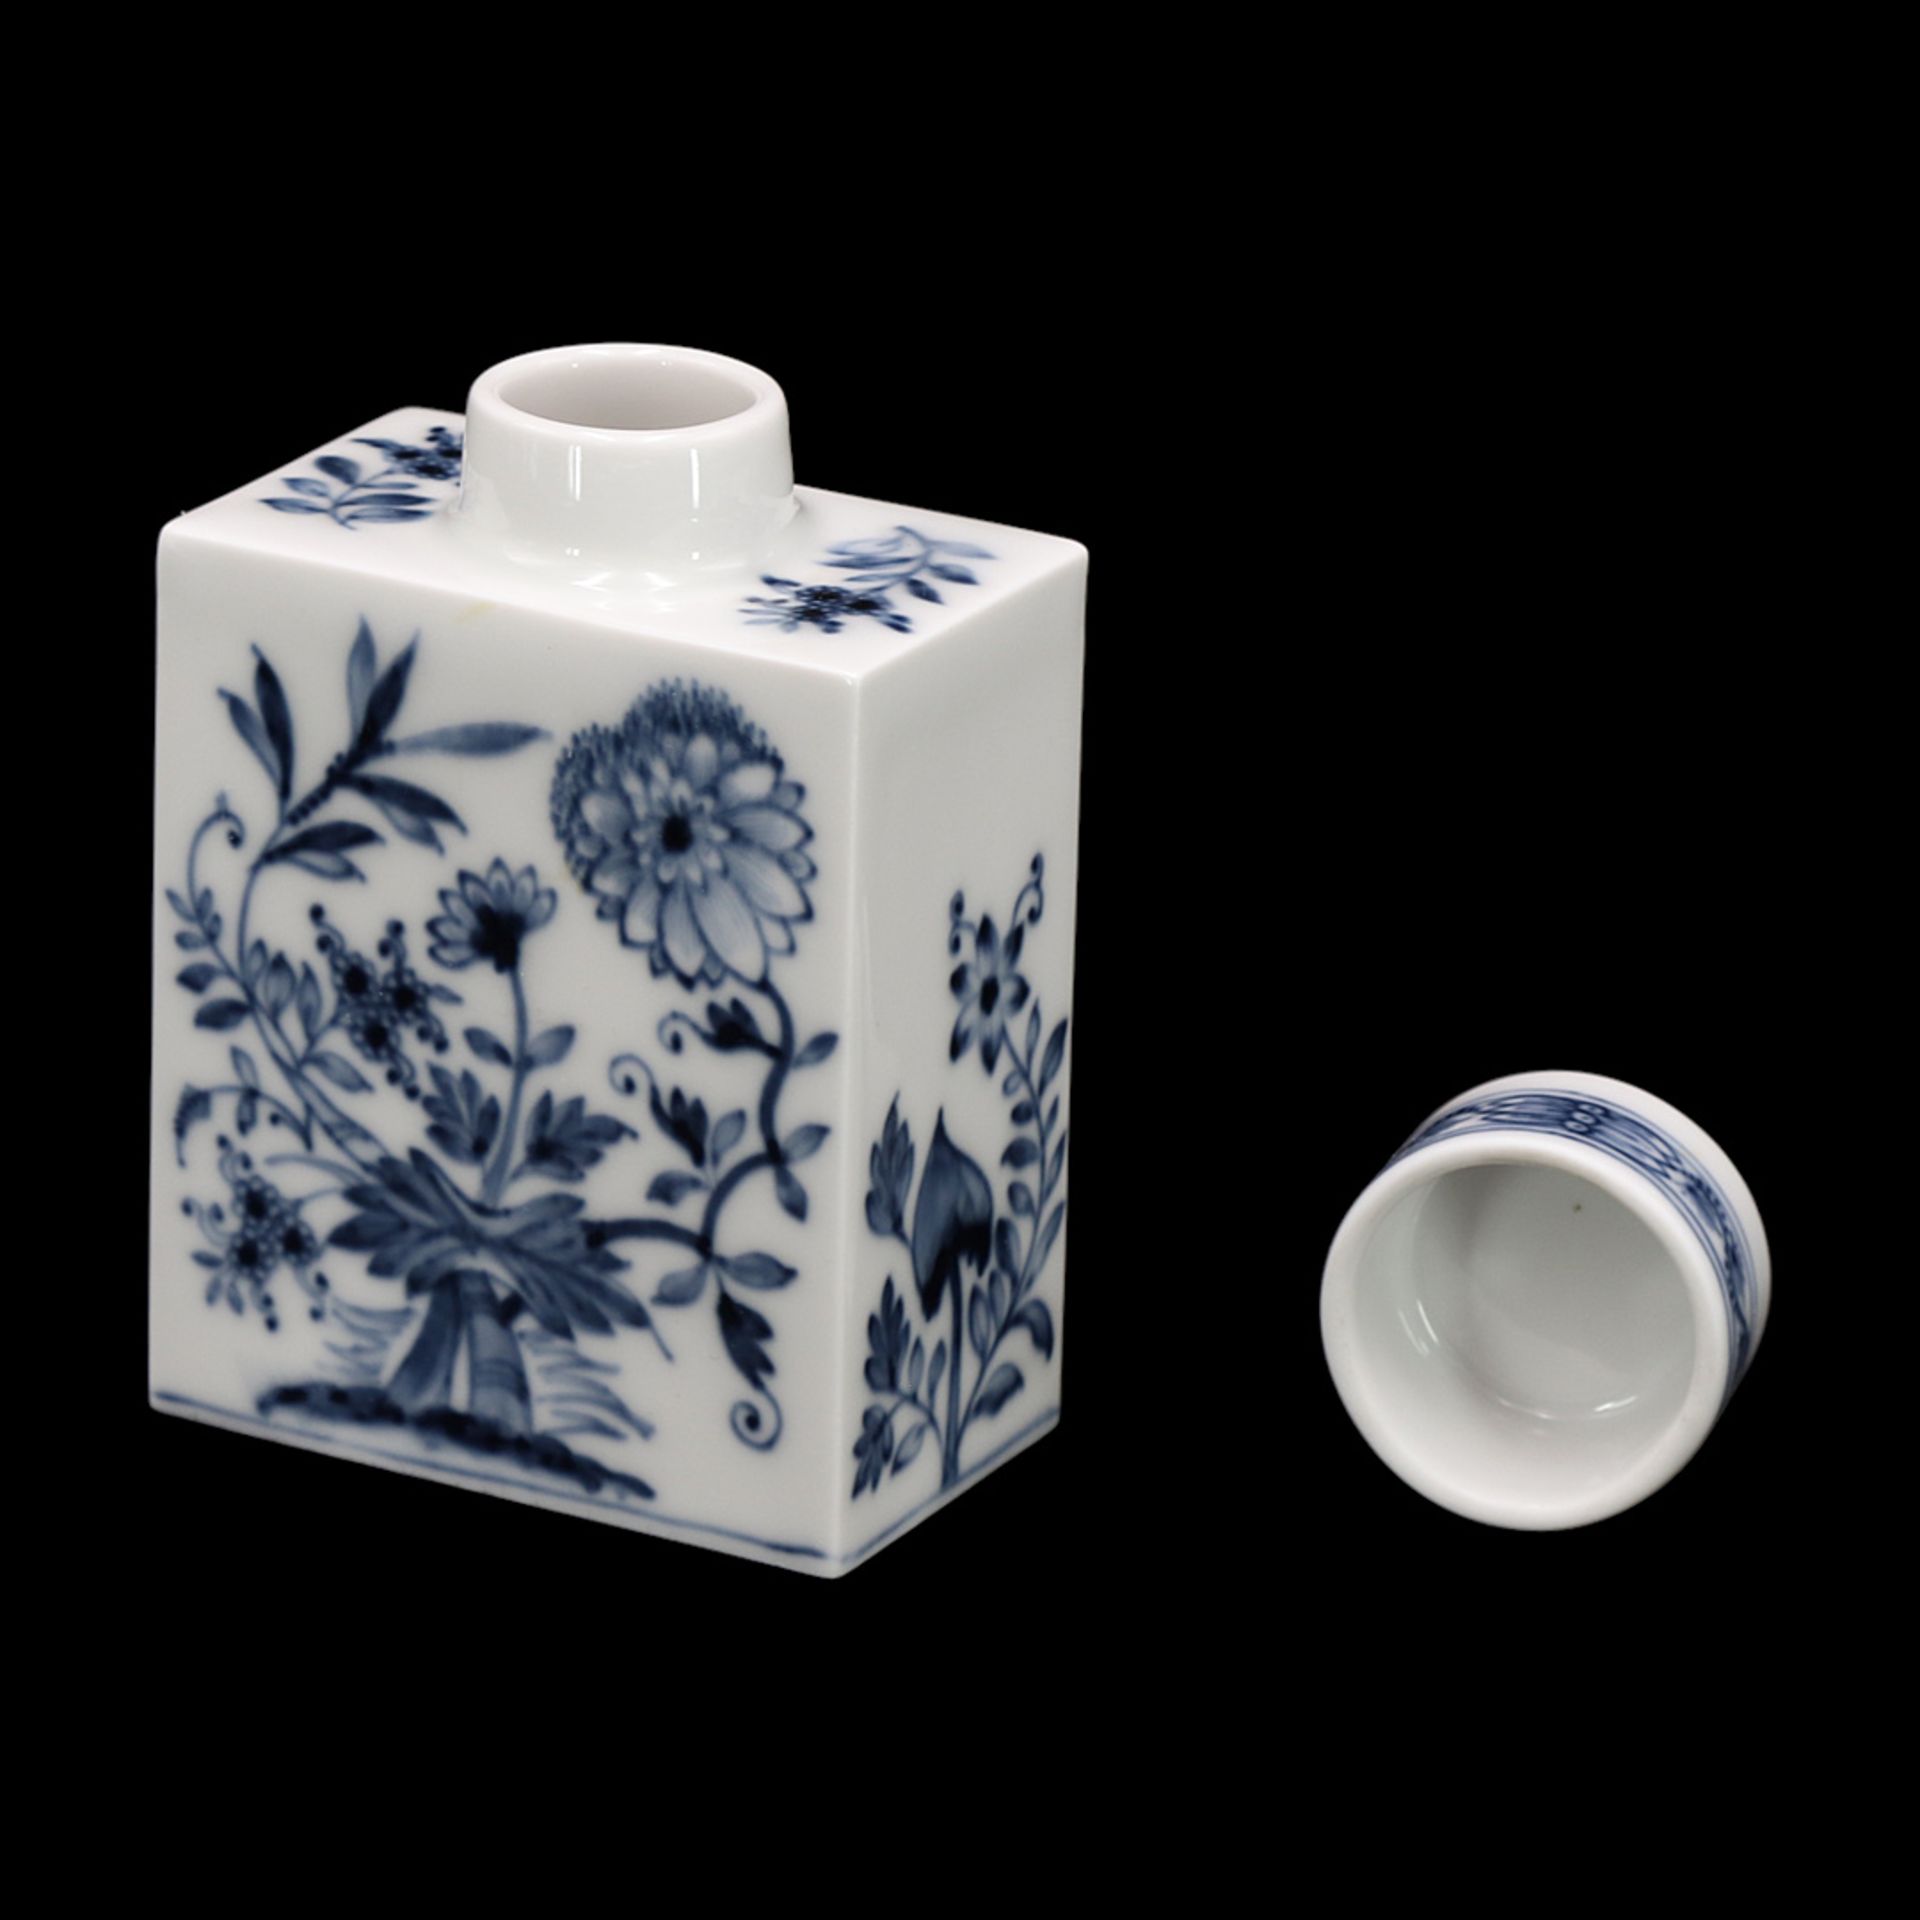 Meissen tea caddy with onion pattern, 1985 - Image 3 of 4